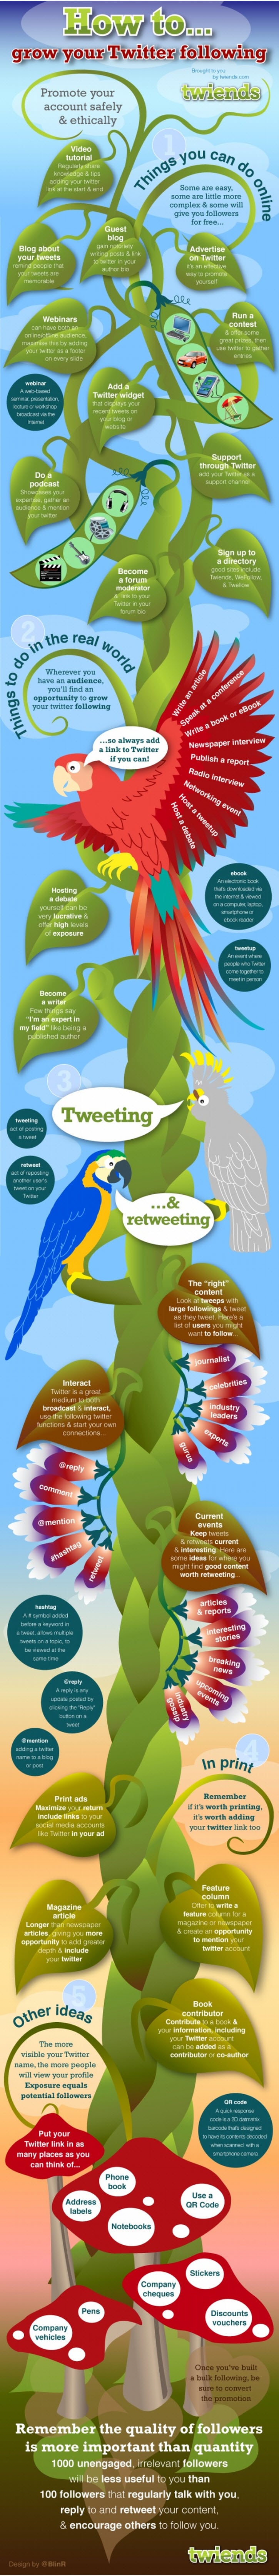 increase-your-twitter-followers-infographic